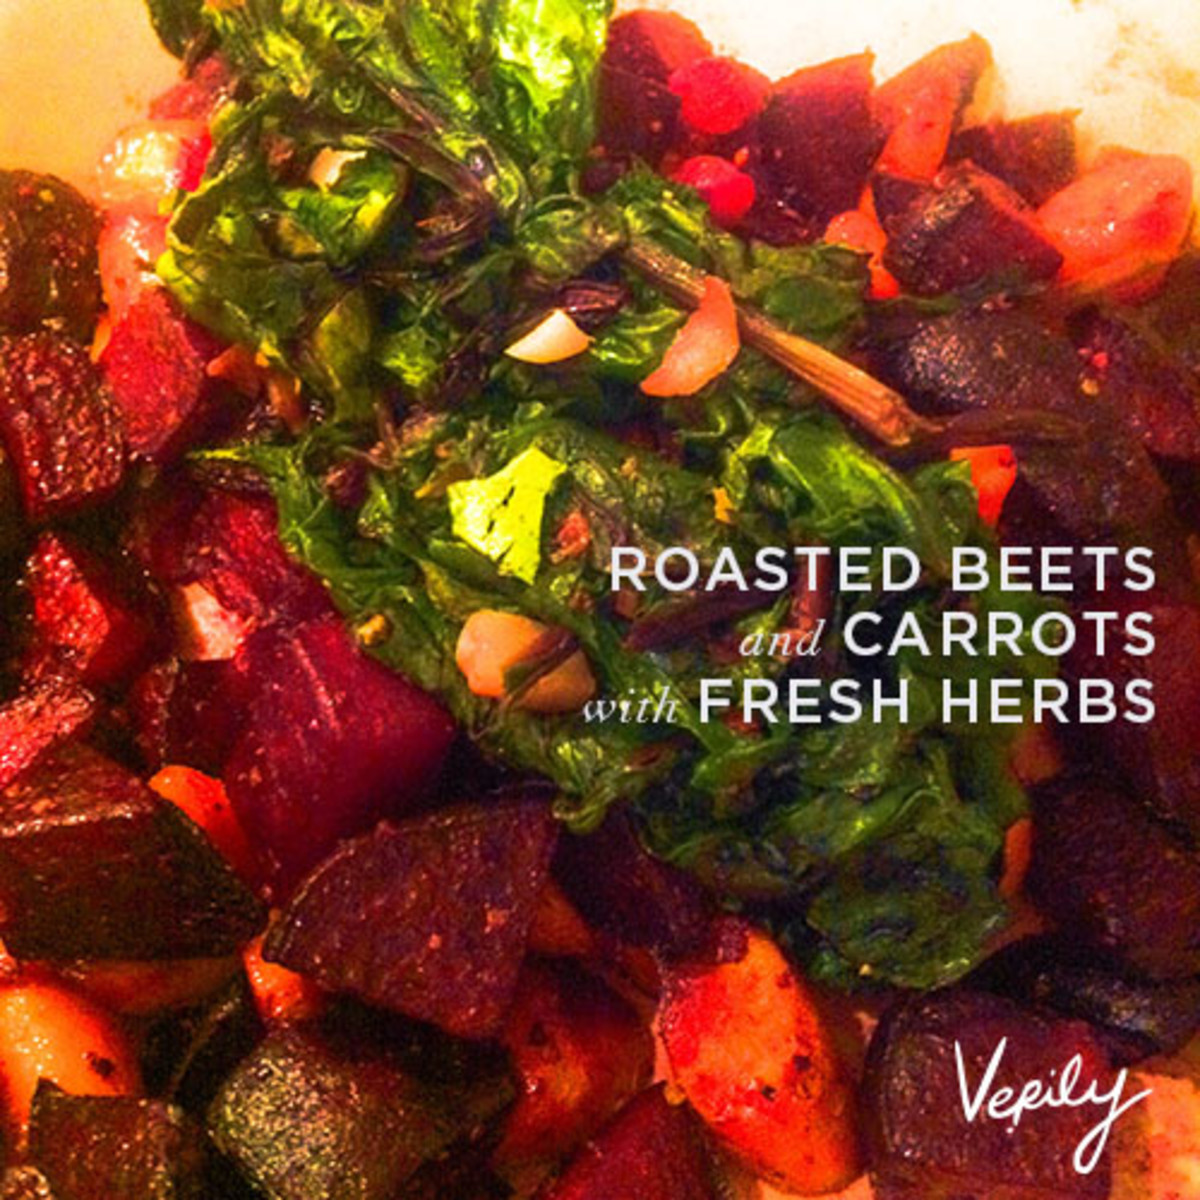 Roasted-Beets-and-Carrots-with-Fresh-Herbs-2-copy